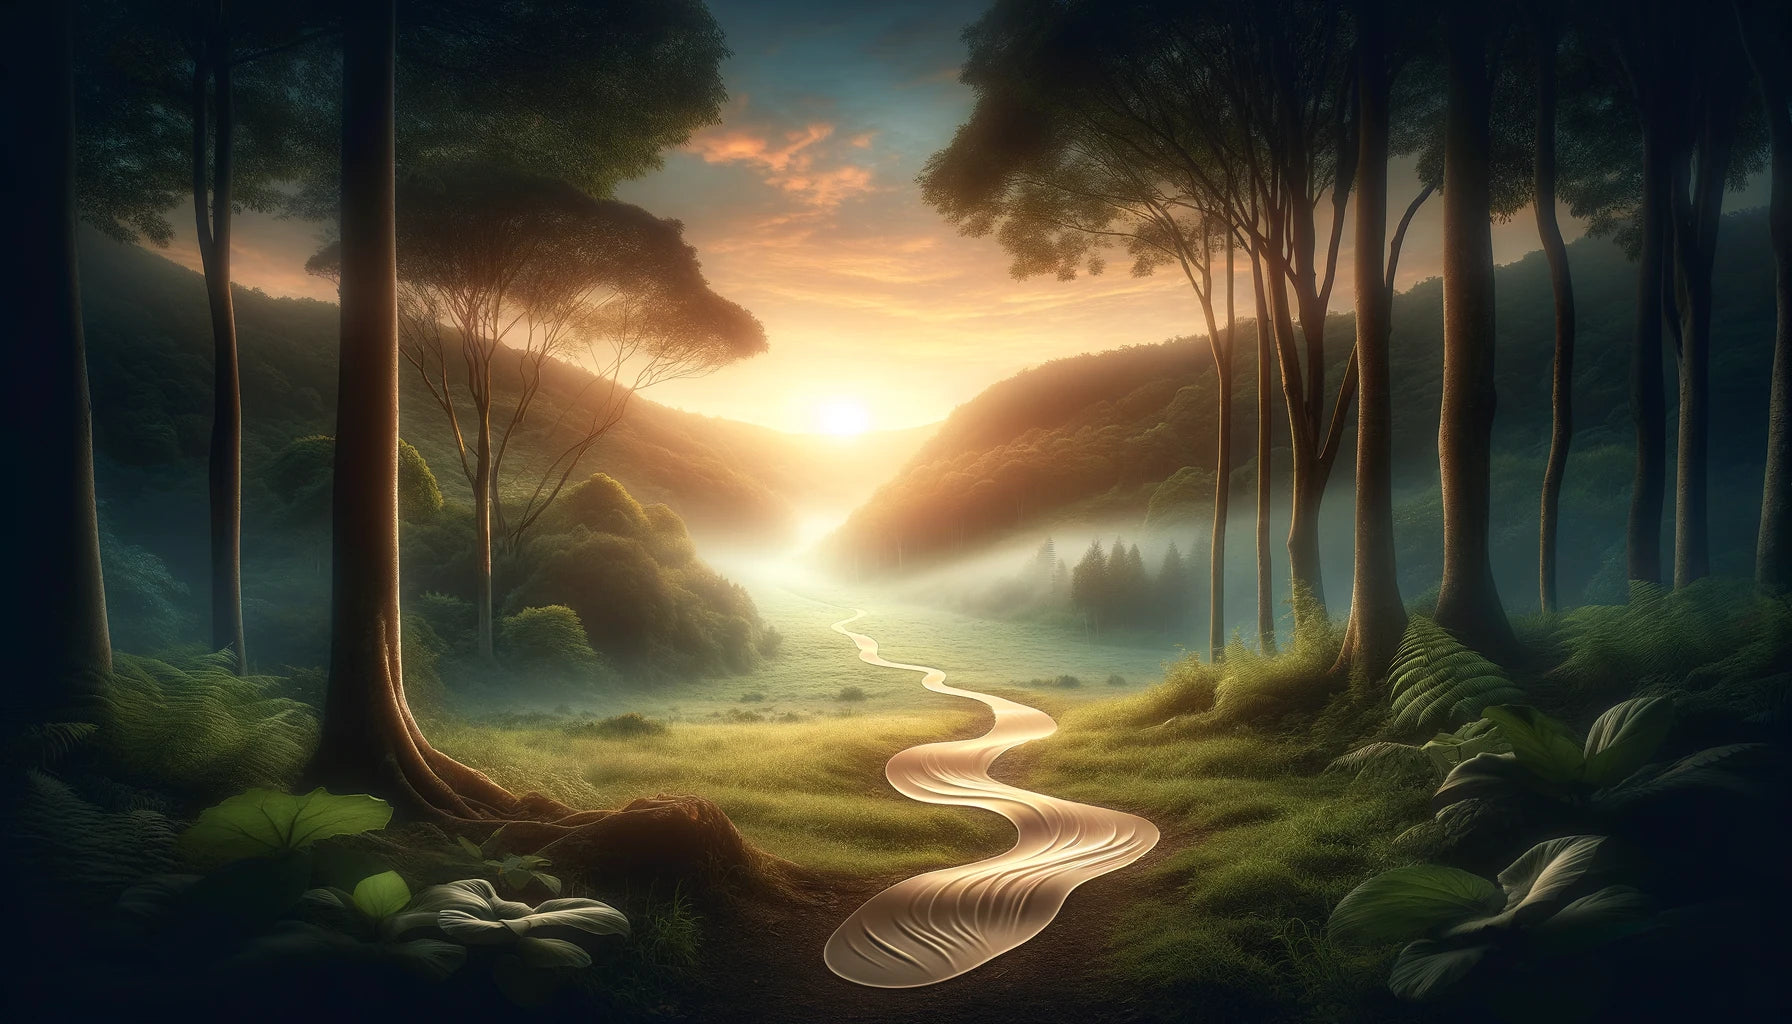 Serene landscape at dawn symbolizing new beginnings and healing journey